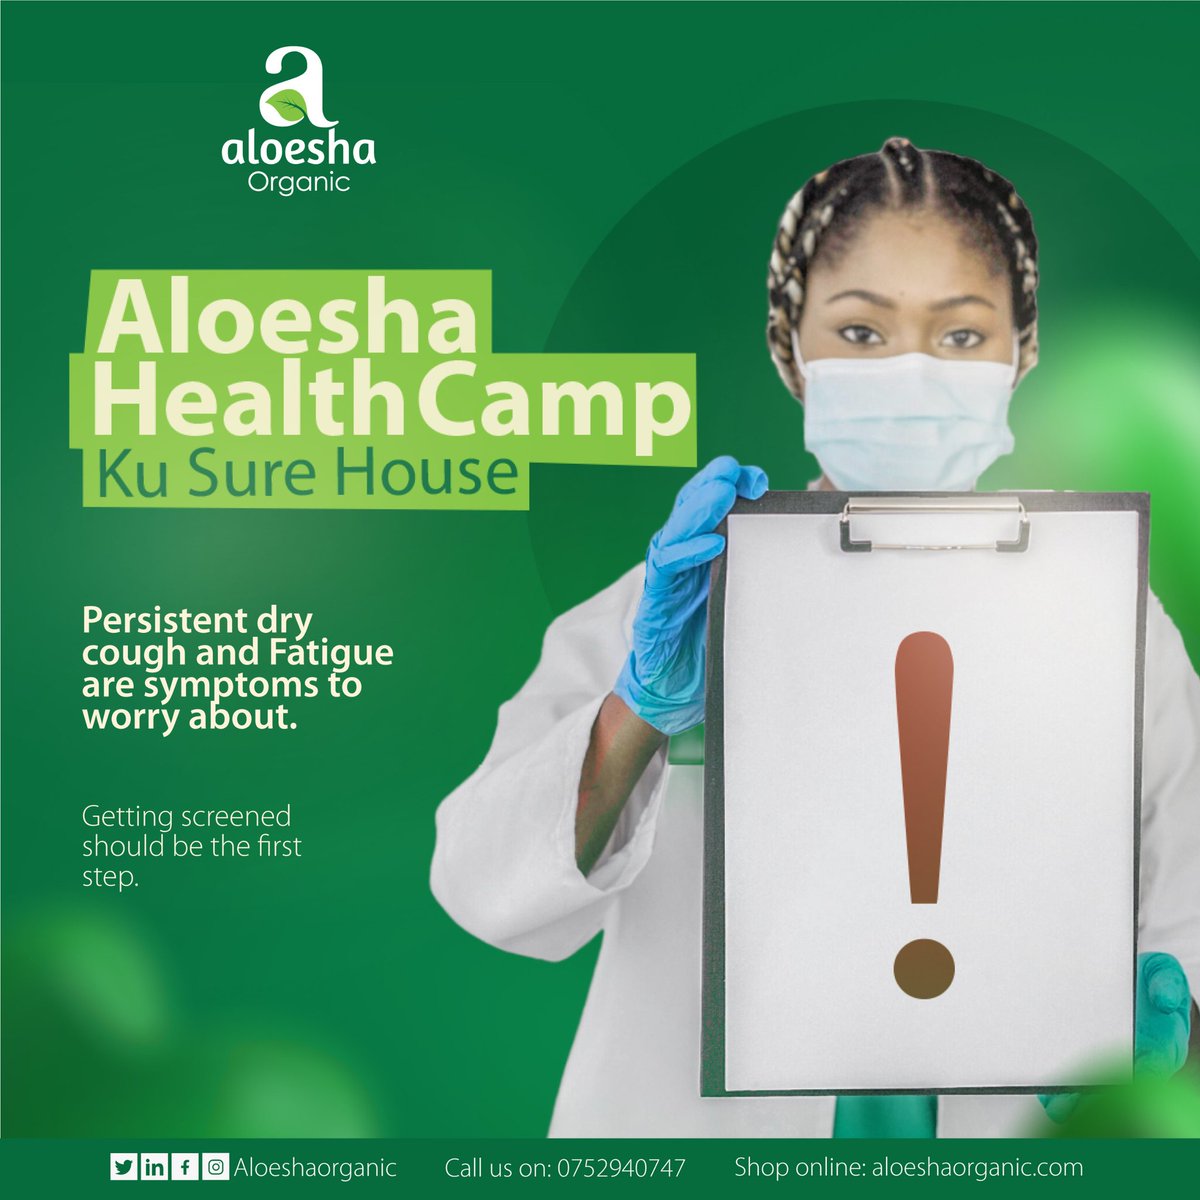 Kind reminder: Don't ignore treatable symptoms. Take the first step and get screened. Join us for our health camp from May 30th to June 1st at Sure House, Bombo Rd. Services will include screening, laboratory services, and consultations. #herbalife